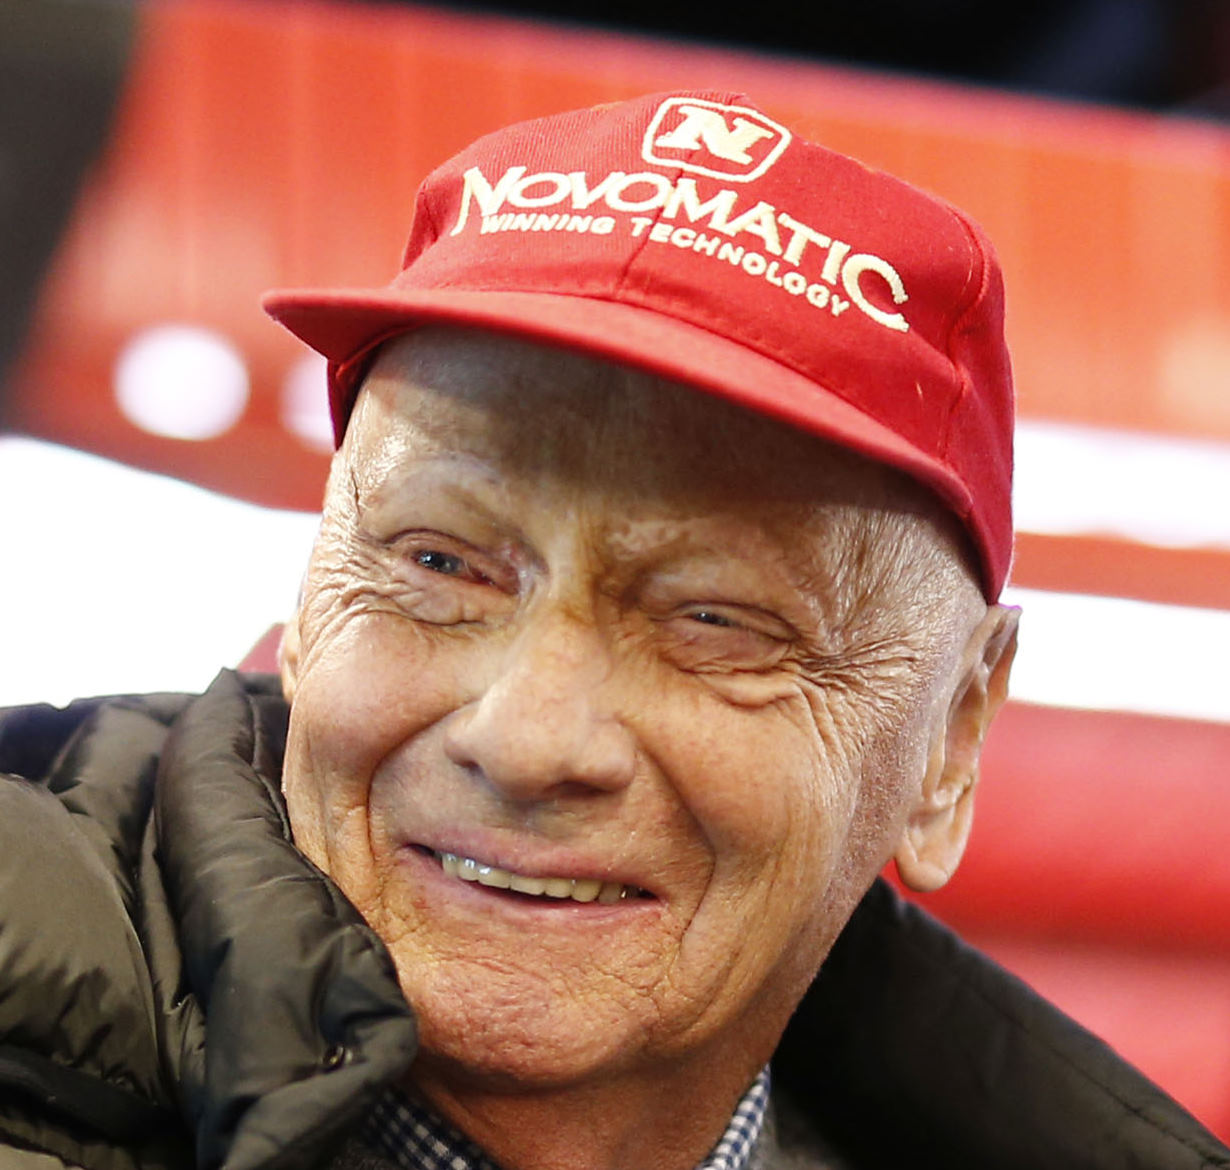 Lauda knows it was Aldo Costa who made the Ferrari magic for Schumacher and now the current Mercedes, and not Brawn